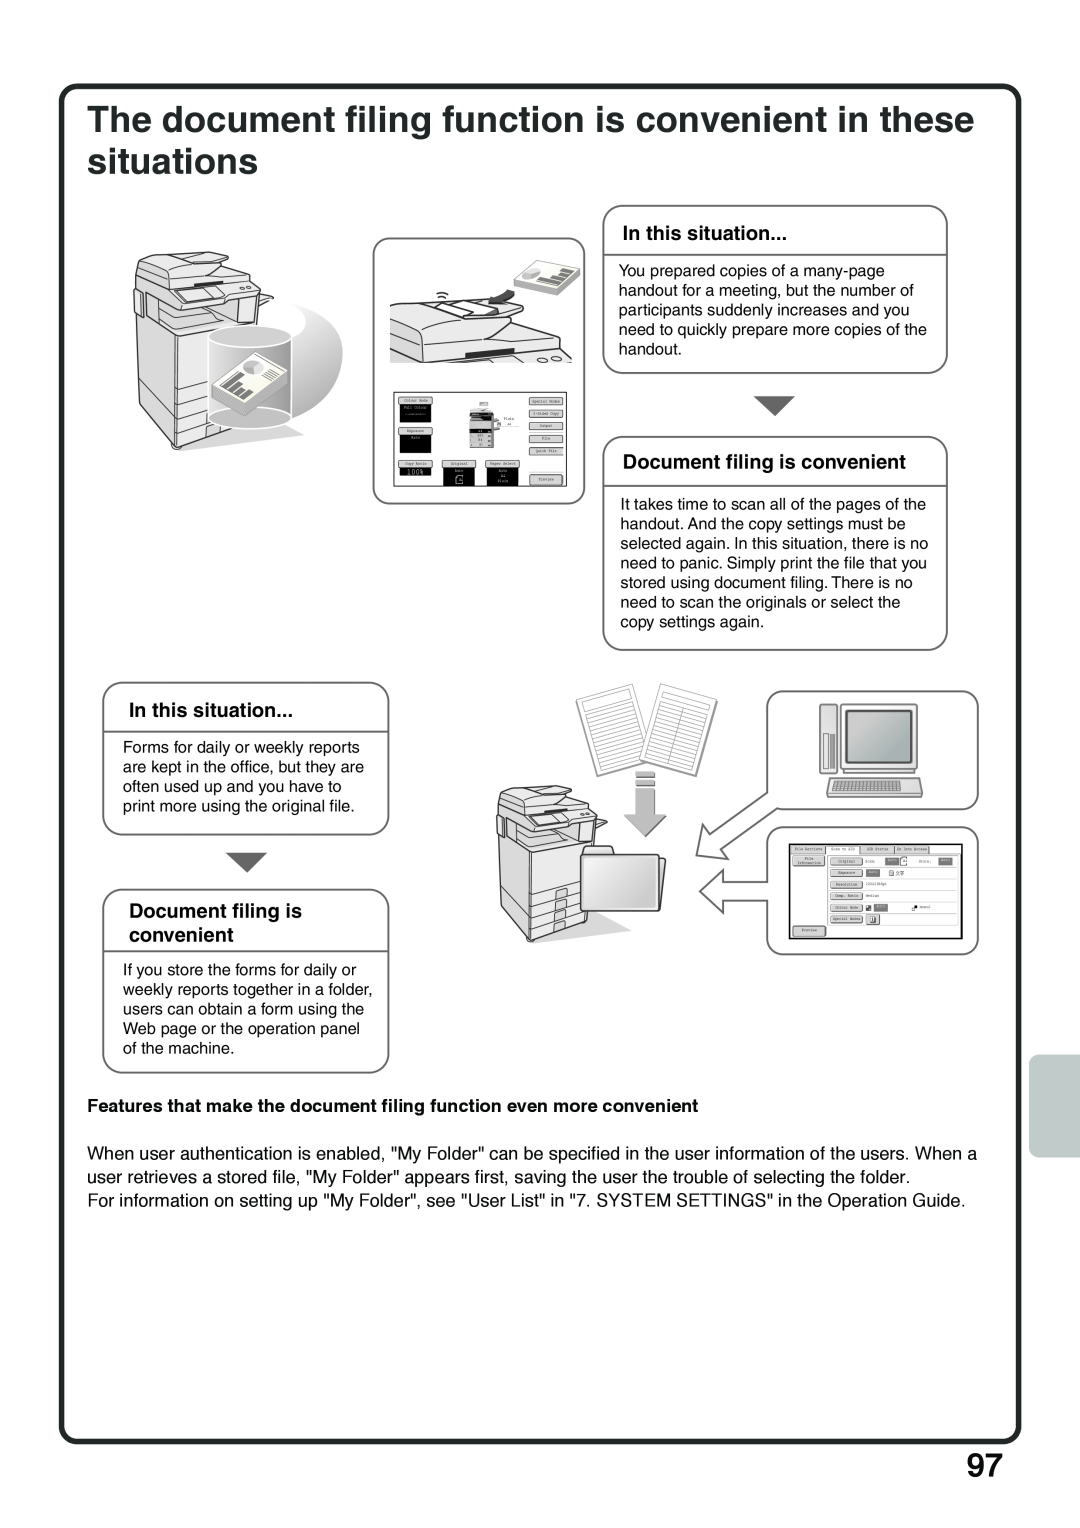 Sharp MX-5001N, MX-4100N, MX-5000N The document filing function is convenient in these situations, In this situation 